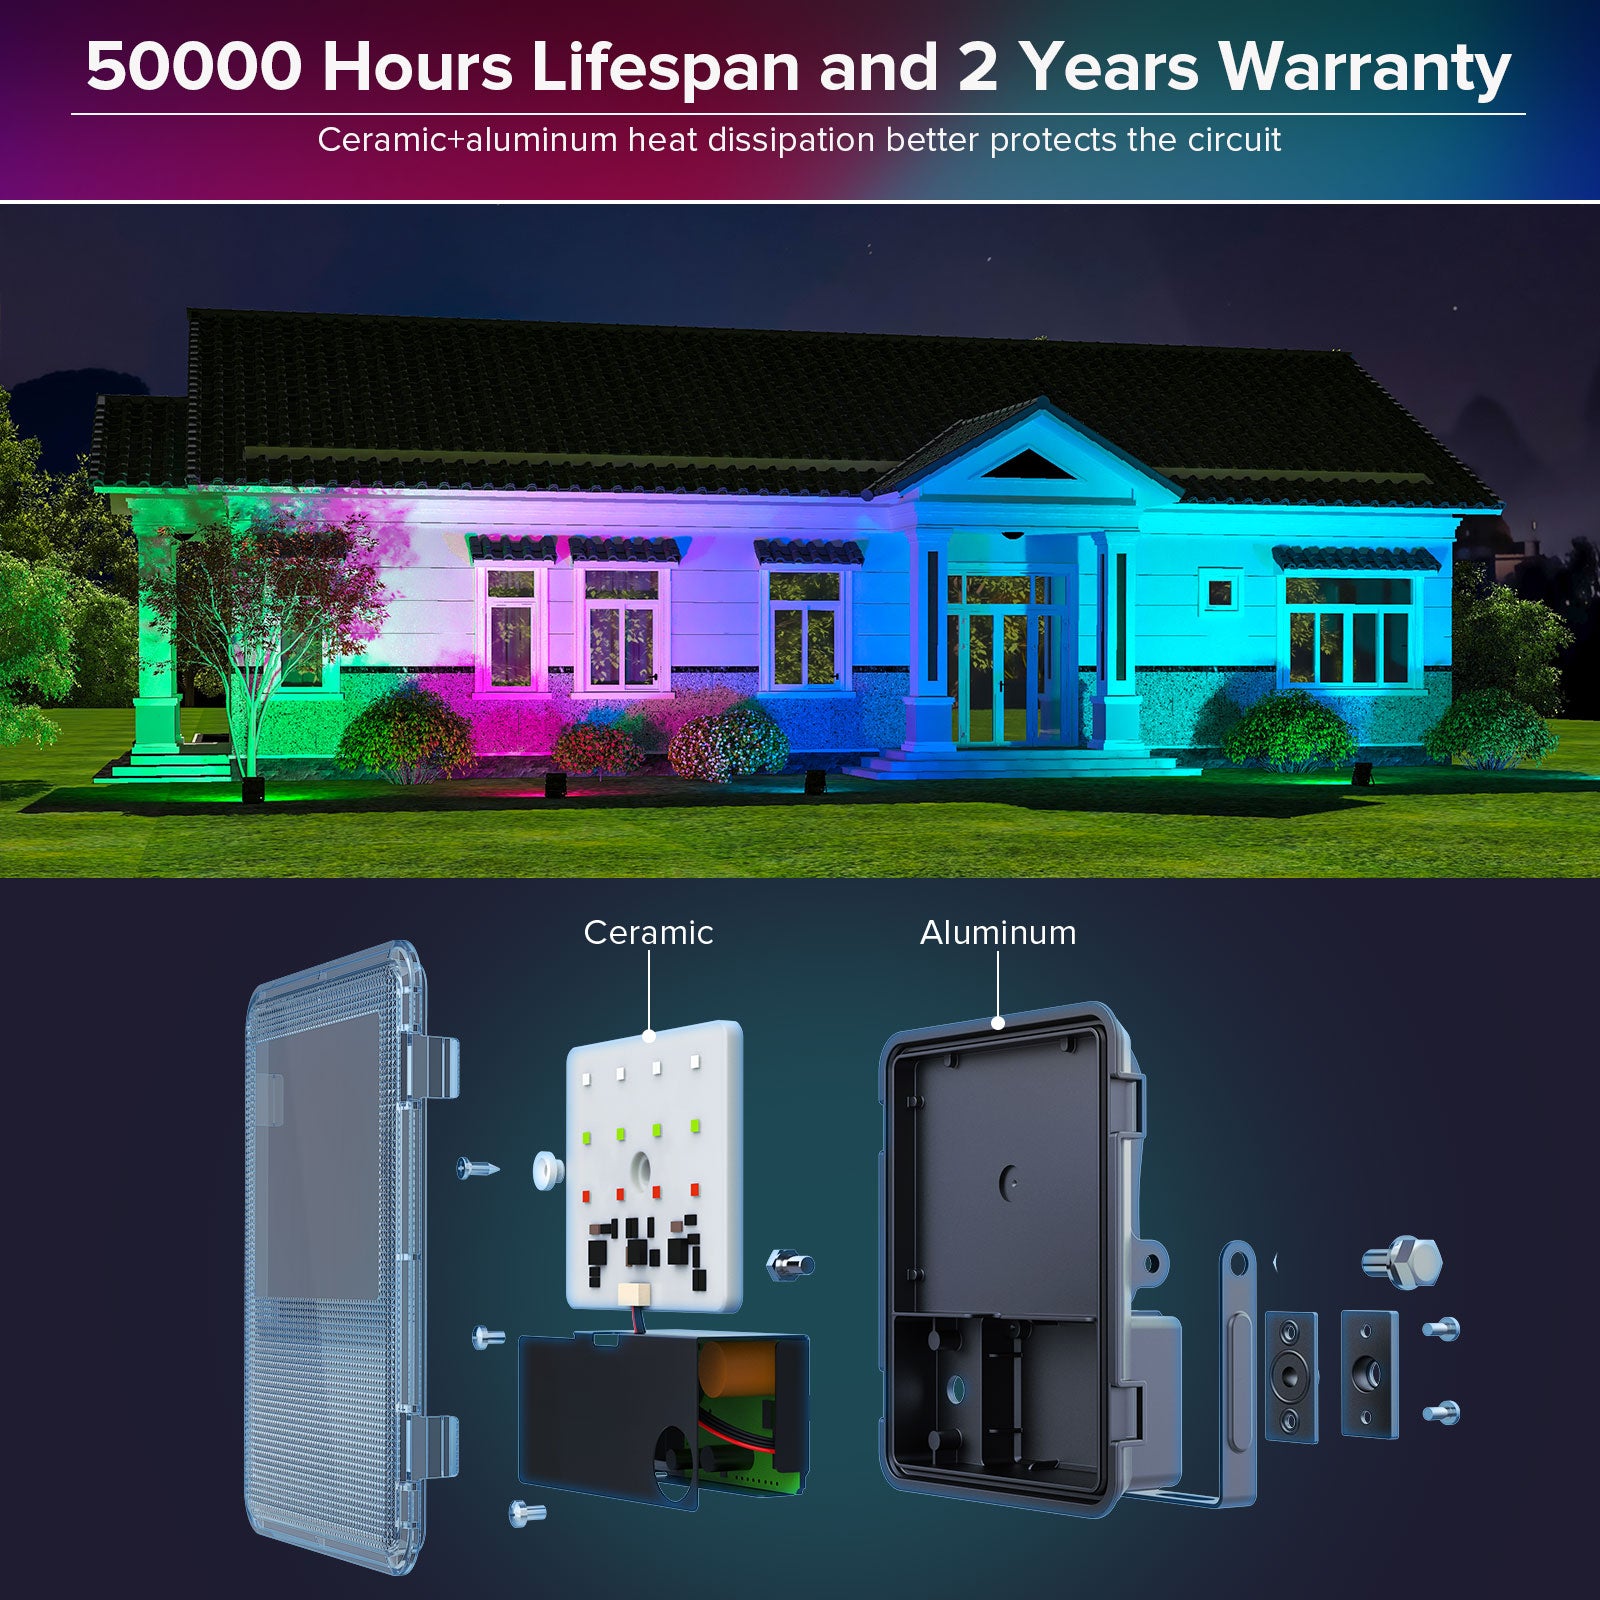 40W RGB Led Flood Light (US ONLY) provides 50000 Hours Lifespan and 2 Years Warranty.